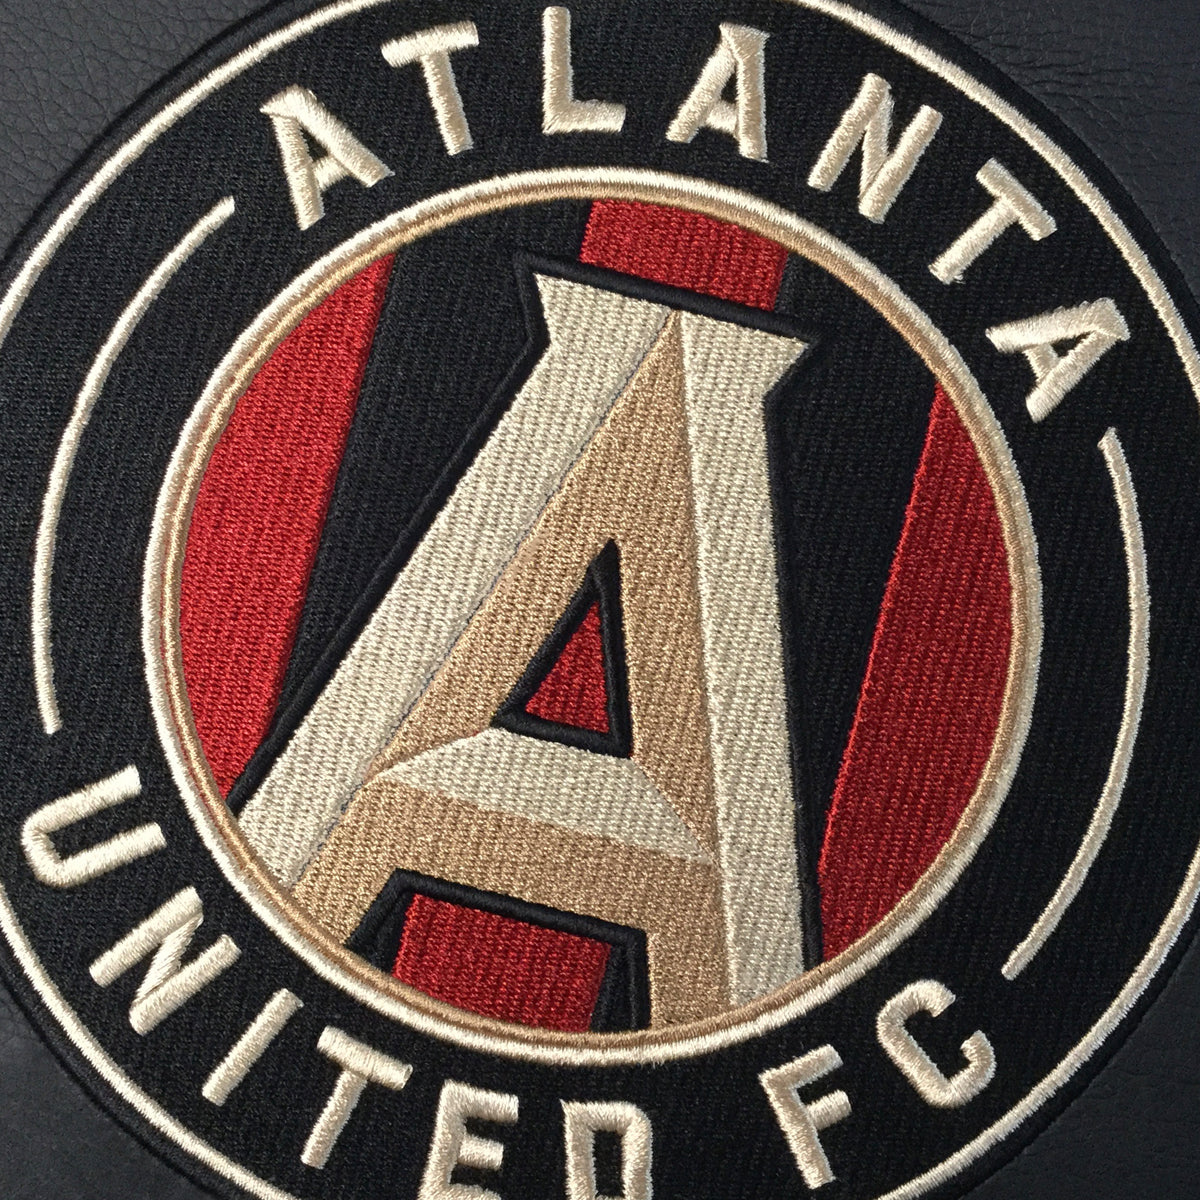 Stealth Power Plus Recliner with Atlanta United FC Logo